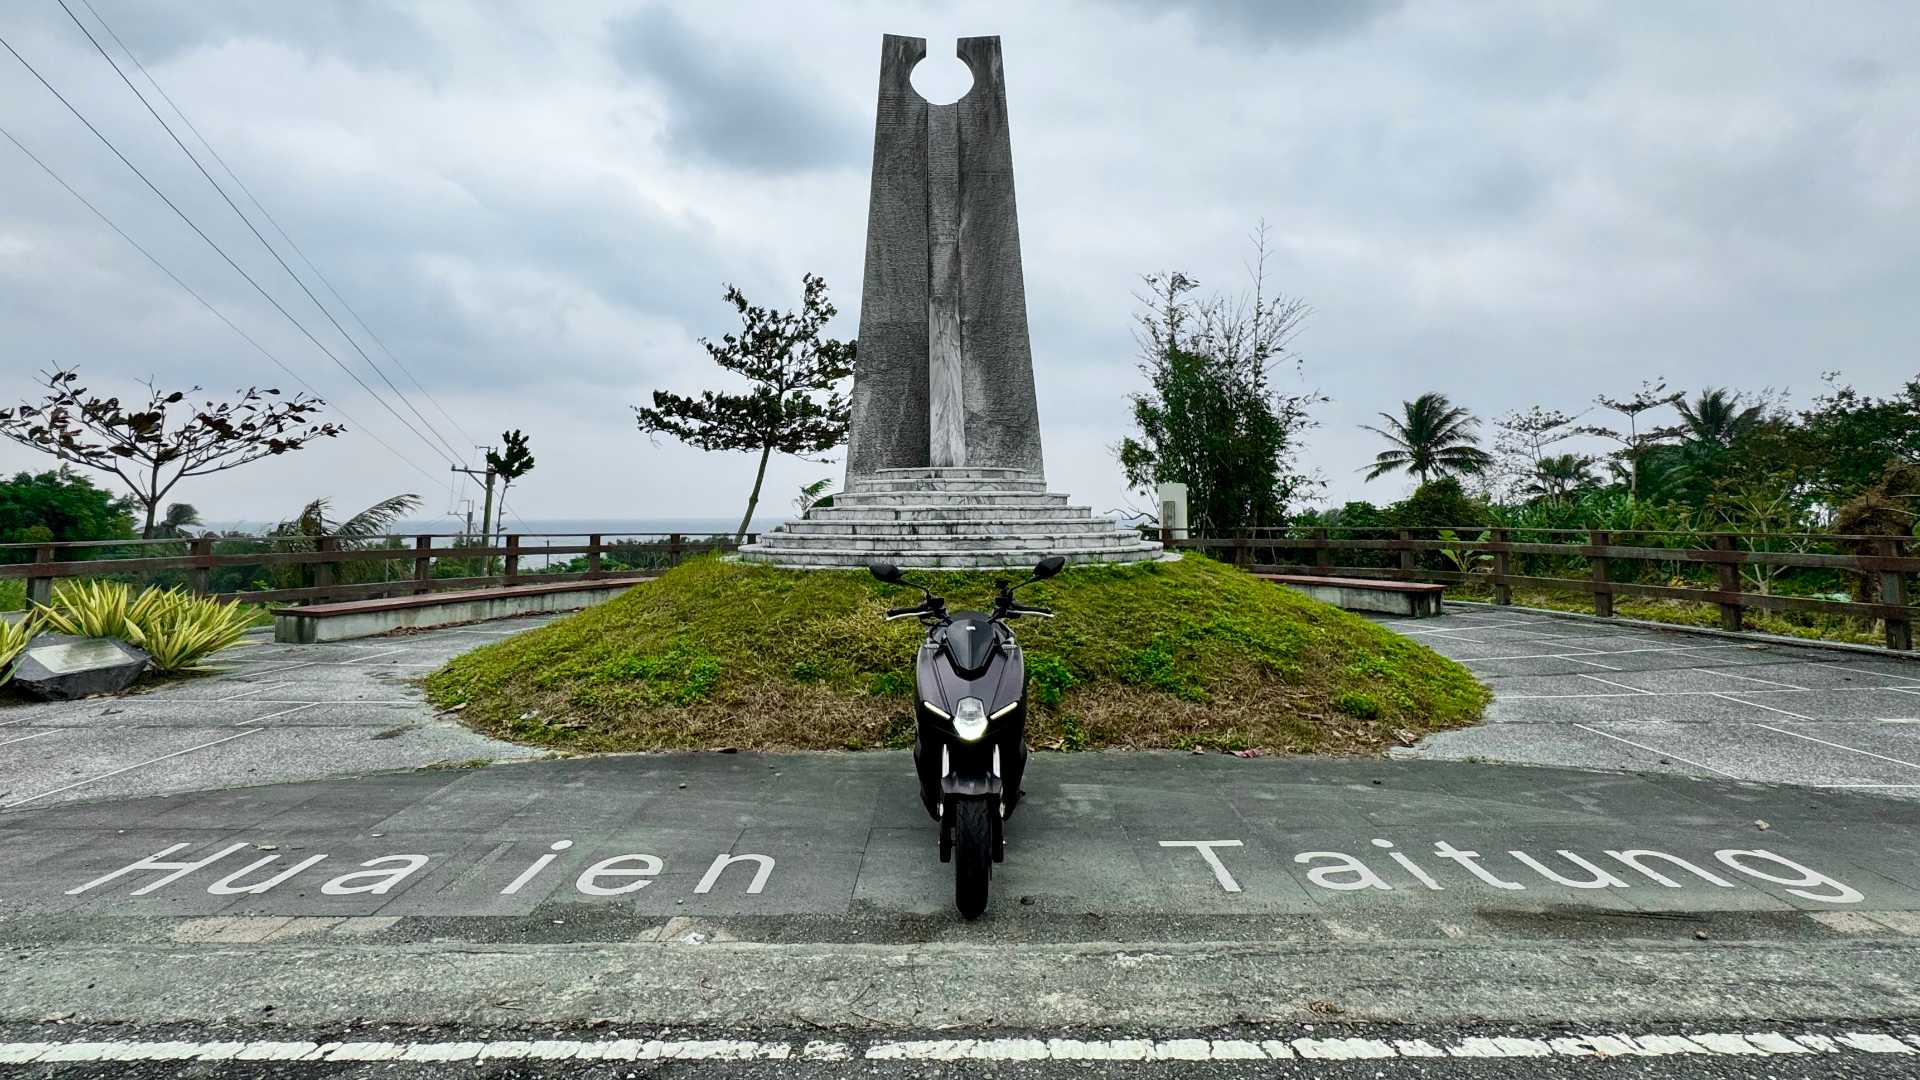 A tall, thin stone monument above the words ‘Hualien’ and ‘Taitung’ printed on the pavement. A motorcycle is parked between the two words, facing the camera with its lights on.